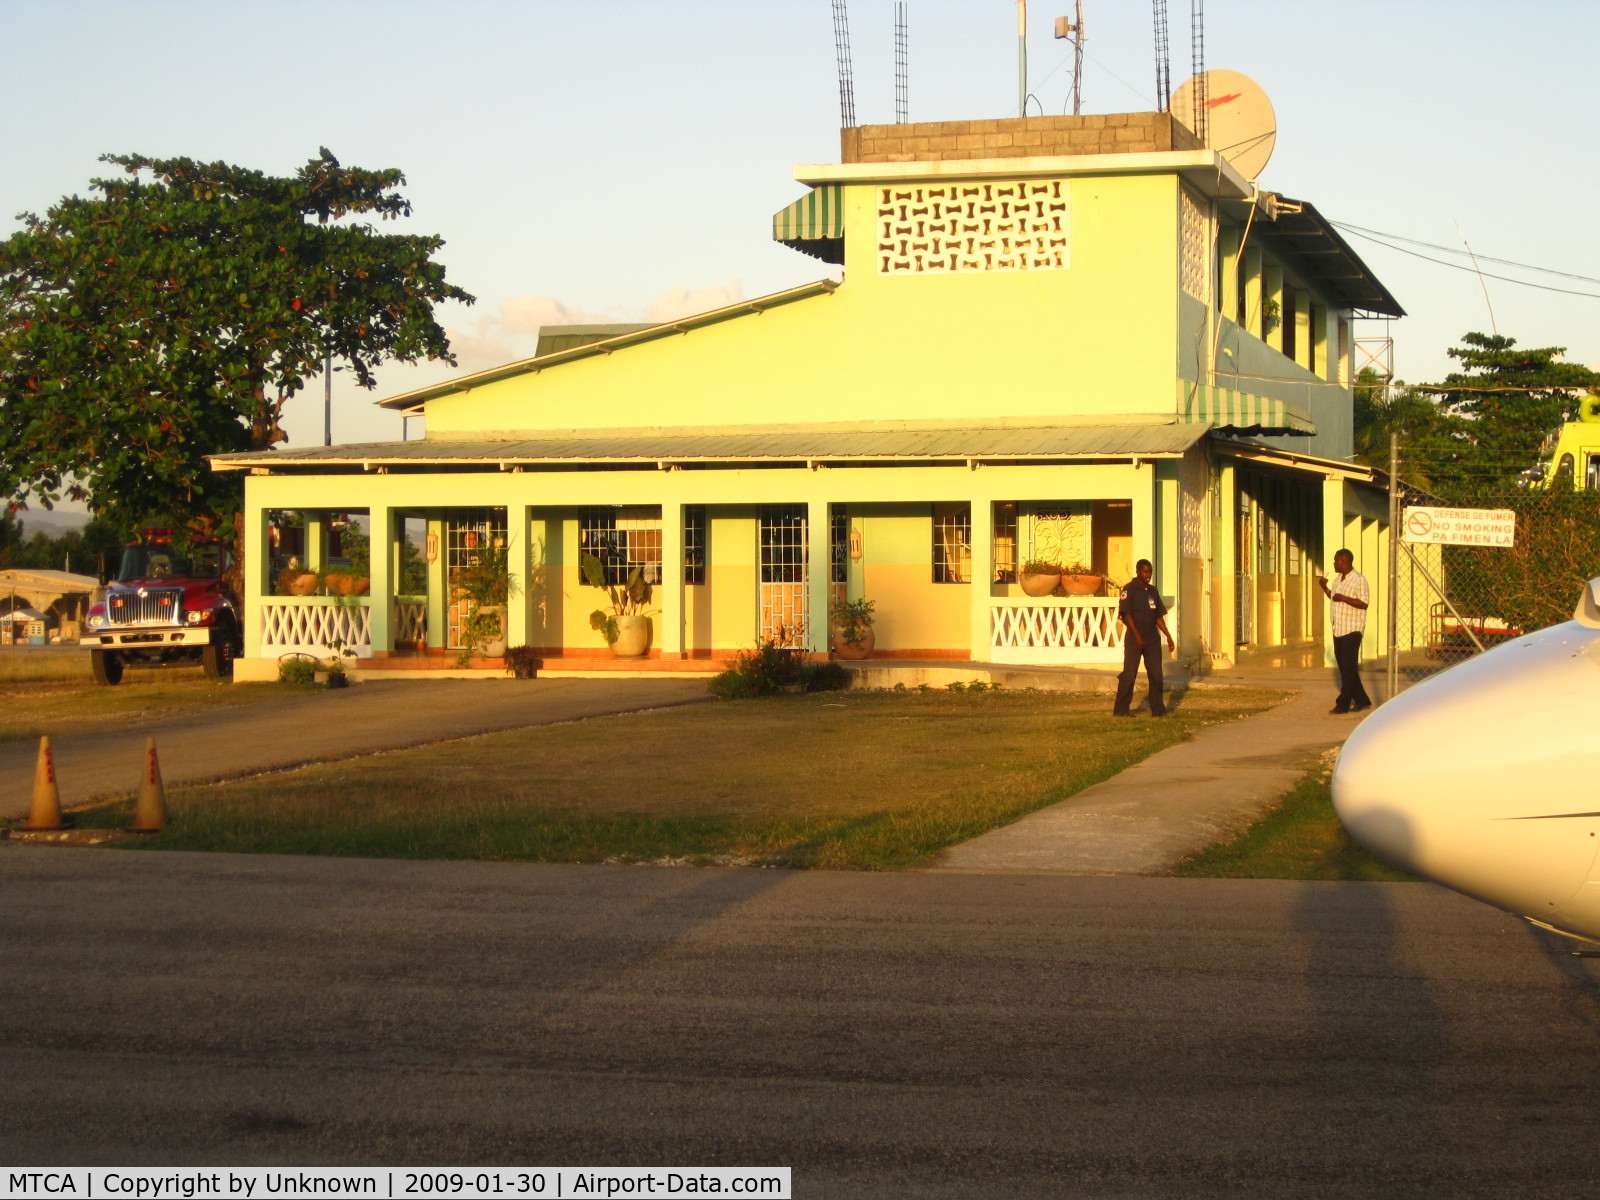 Les Cayes Airport, Les Cayes Haiti (MTCA) - The Airport of Les Cayes